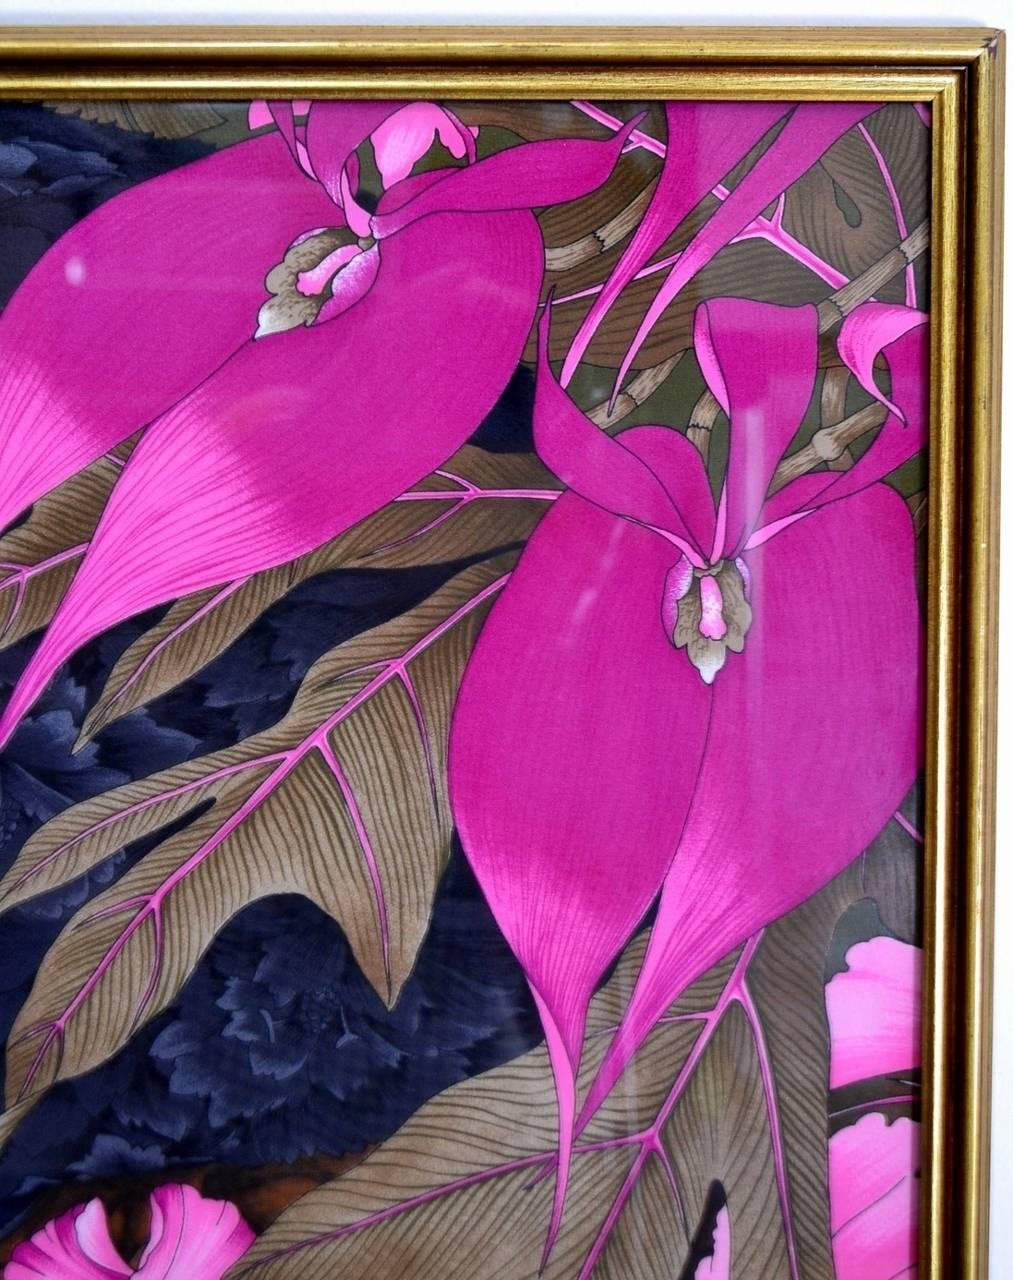 This is a beautiful hugh silk scarf framed to become a tropical wall picture with amazing shiny and vibrant colors, especially the black color of the panther and the pink of the flowers.
With the glass in front of the frame hard to fotography, in